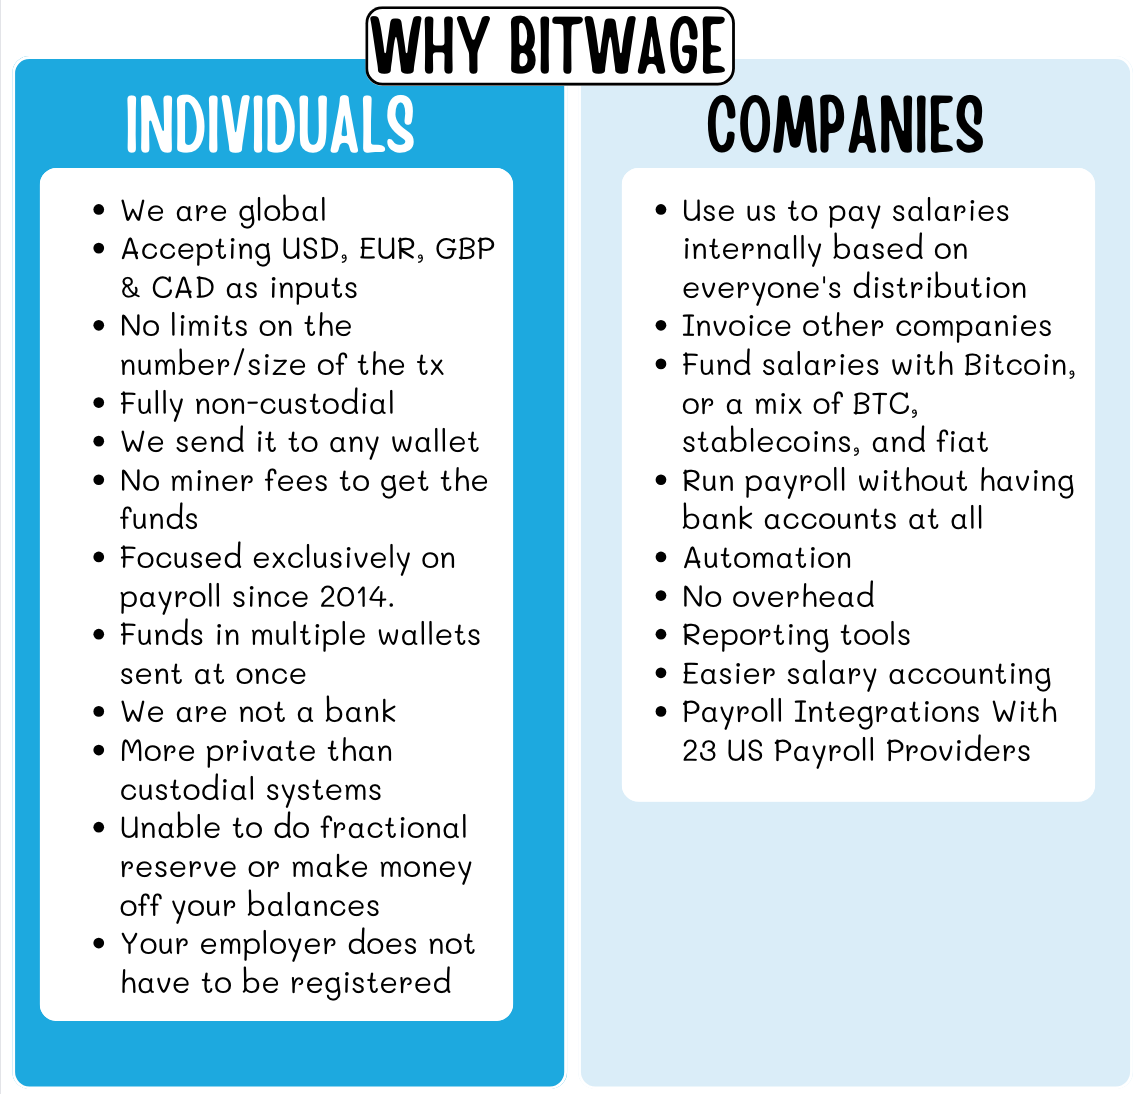 Bitwage expands services to the Philippines - SiliconANGLE